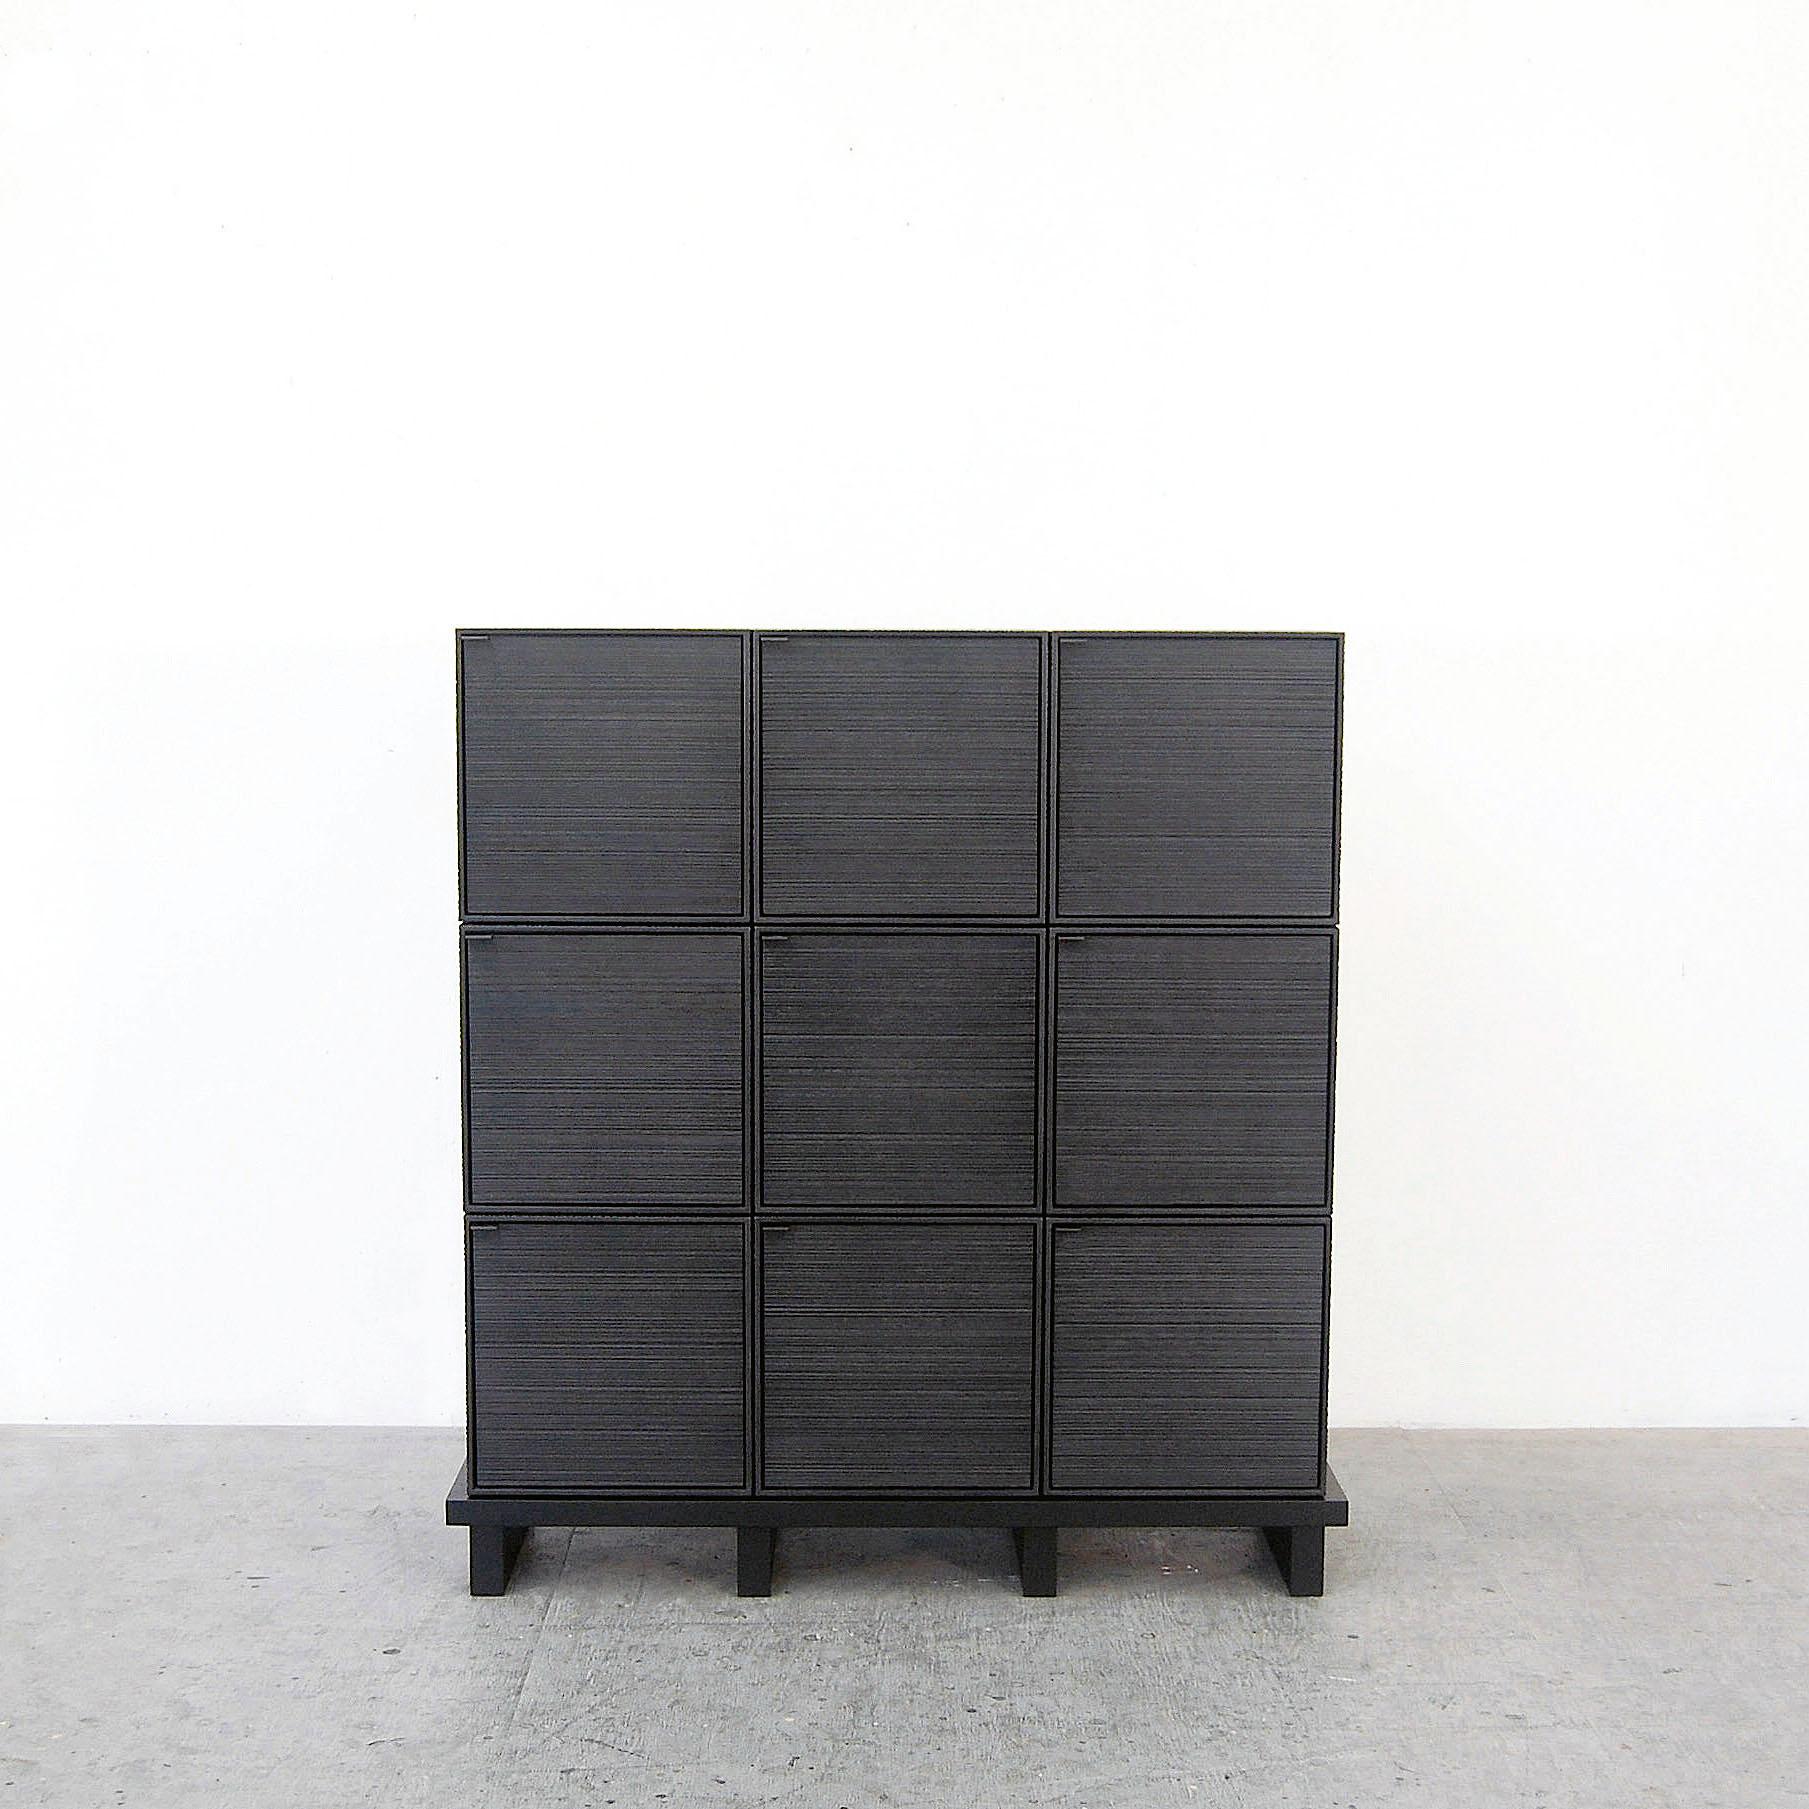 9 Cubes Cabinet by John Eric Byers
Dimensions: D115 x W38 x H115 cm
Materials: sawn + blackened + maple + ash

All works are individually handmade to order.

John Eric Byers creates geometrically inspired pieces that are minimal, emotional, and